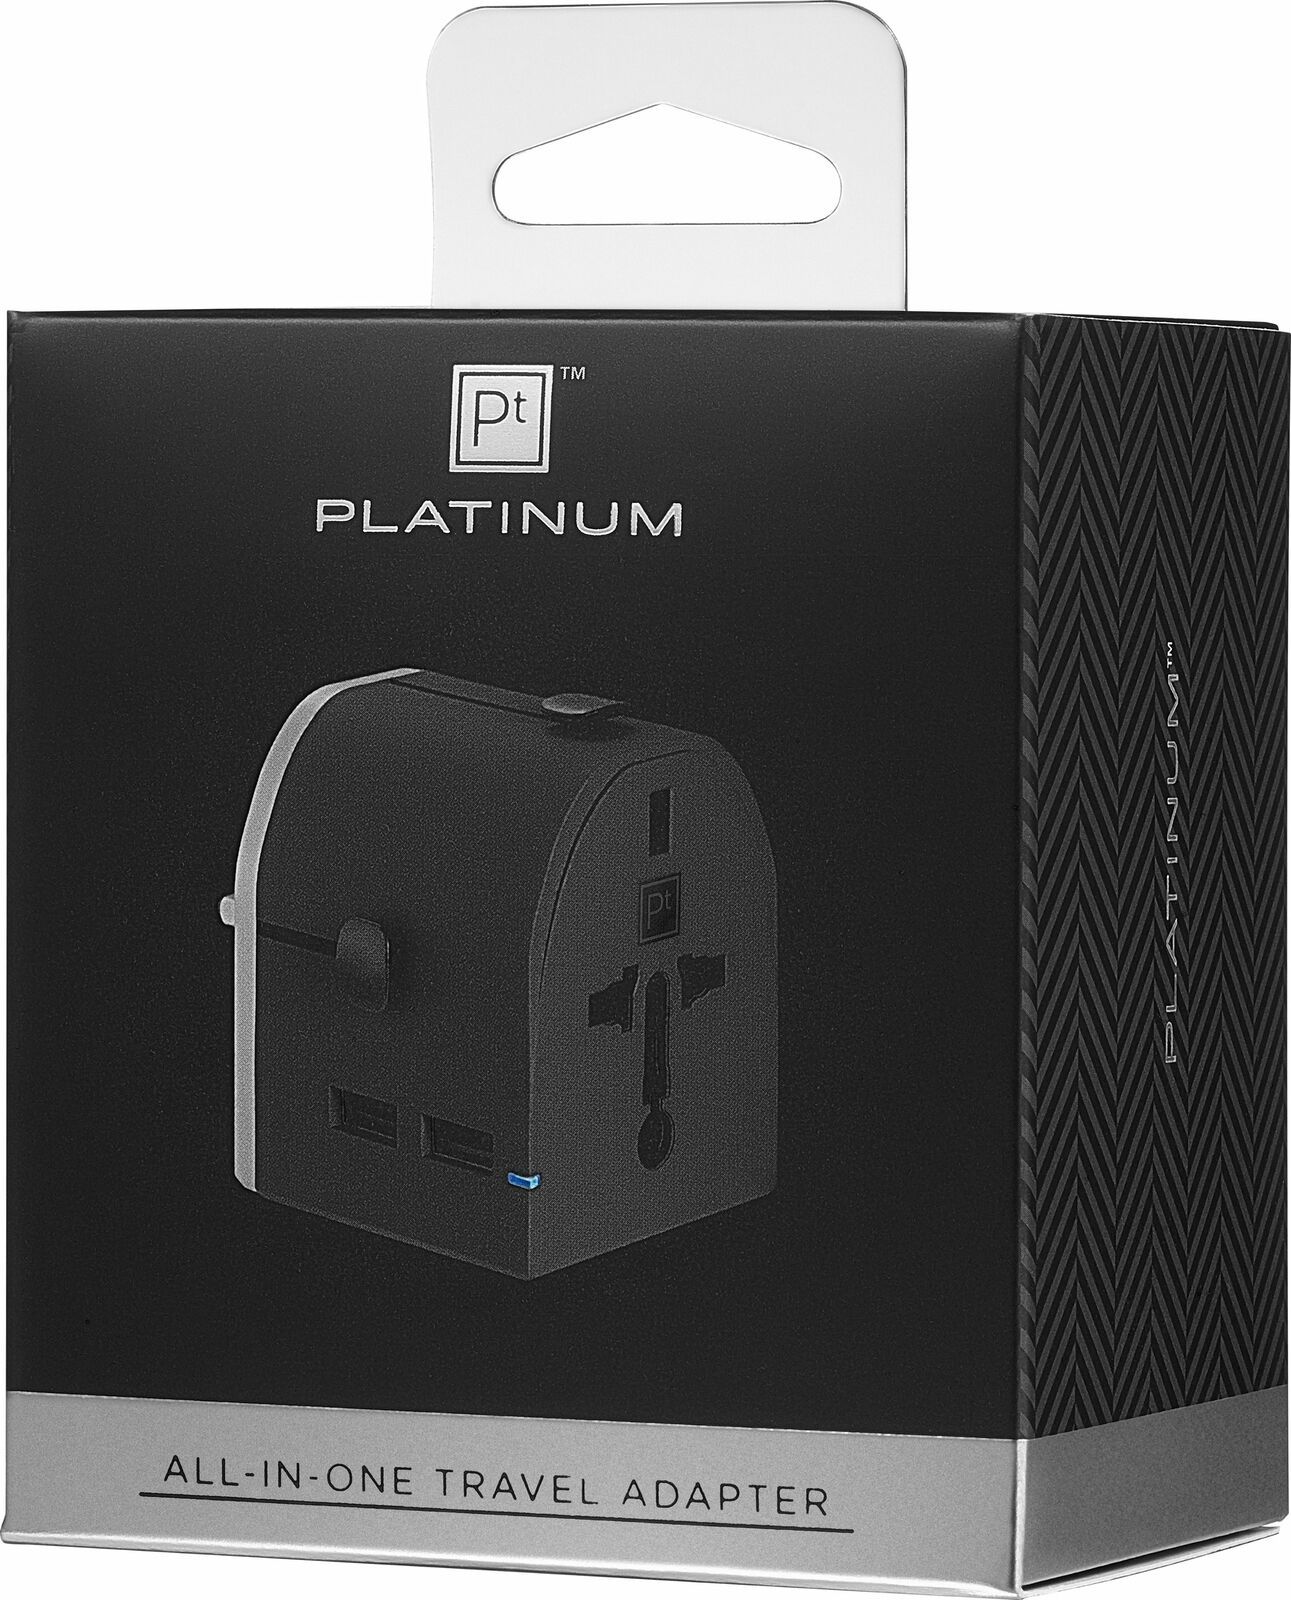 Primary image for Platinum All-in-One Travel Adapter with 2 USB Ports Converts 240 to 120 Black